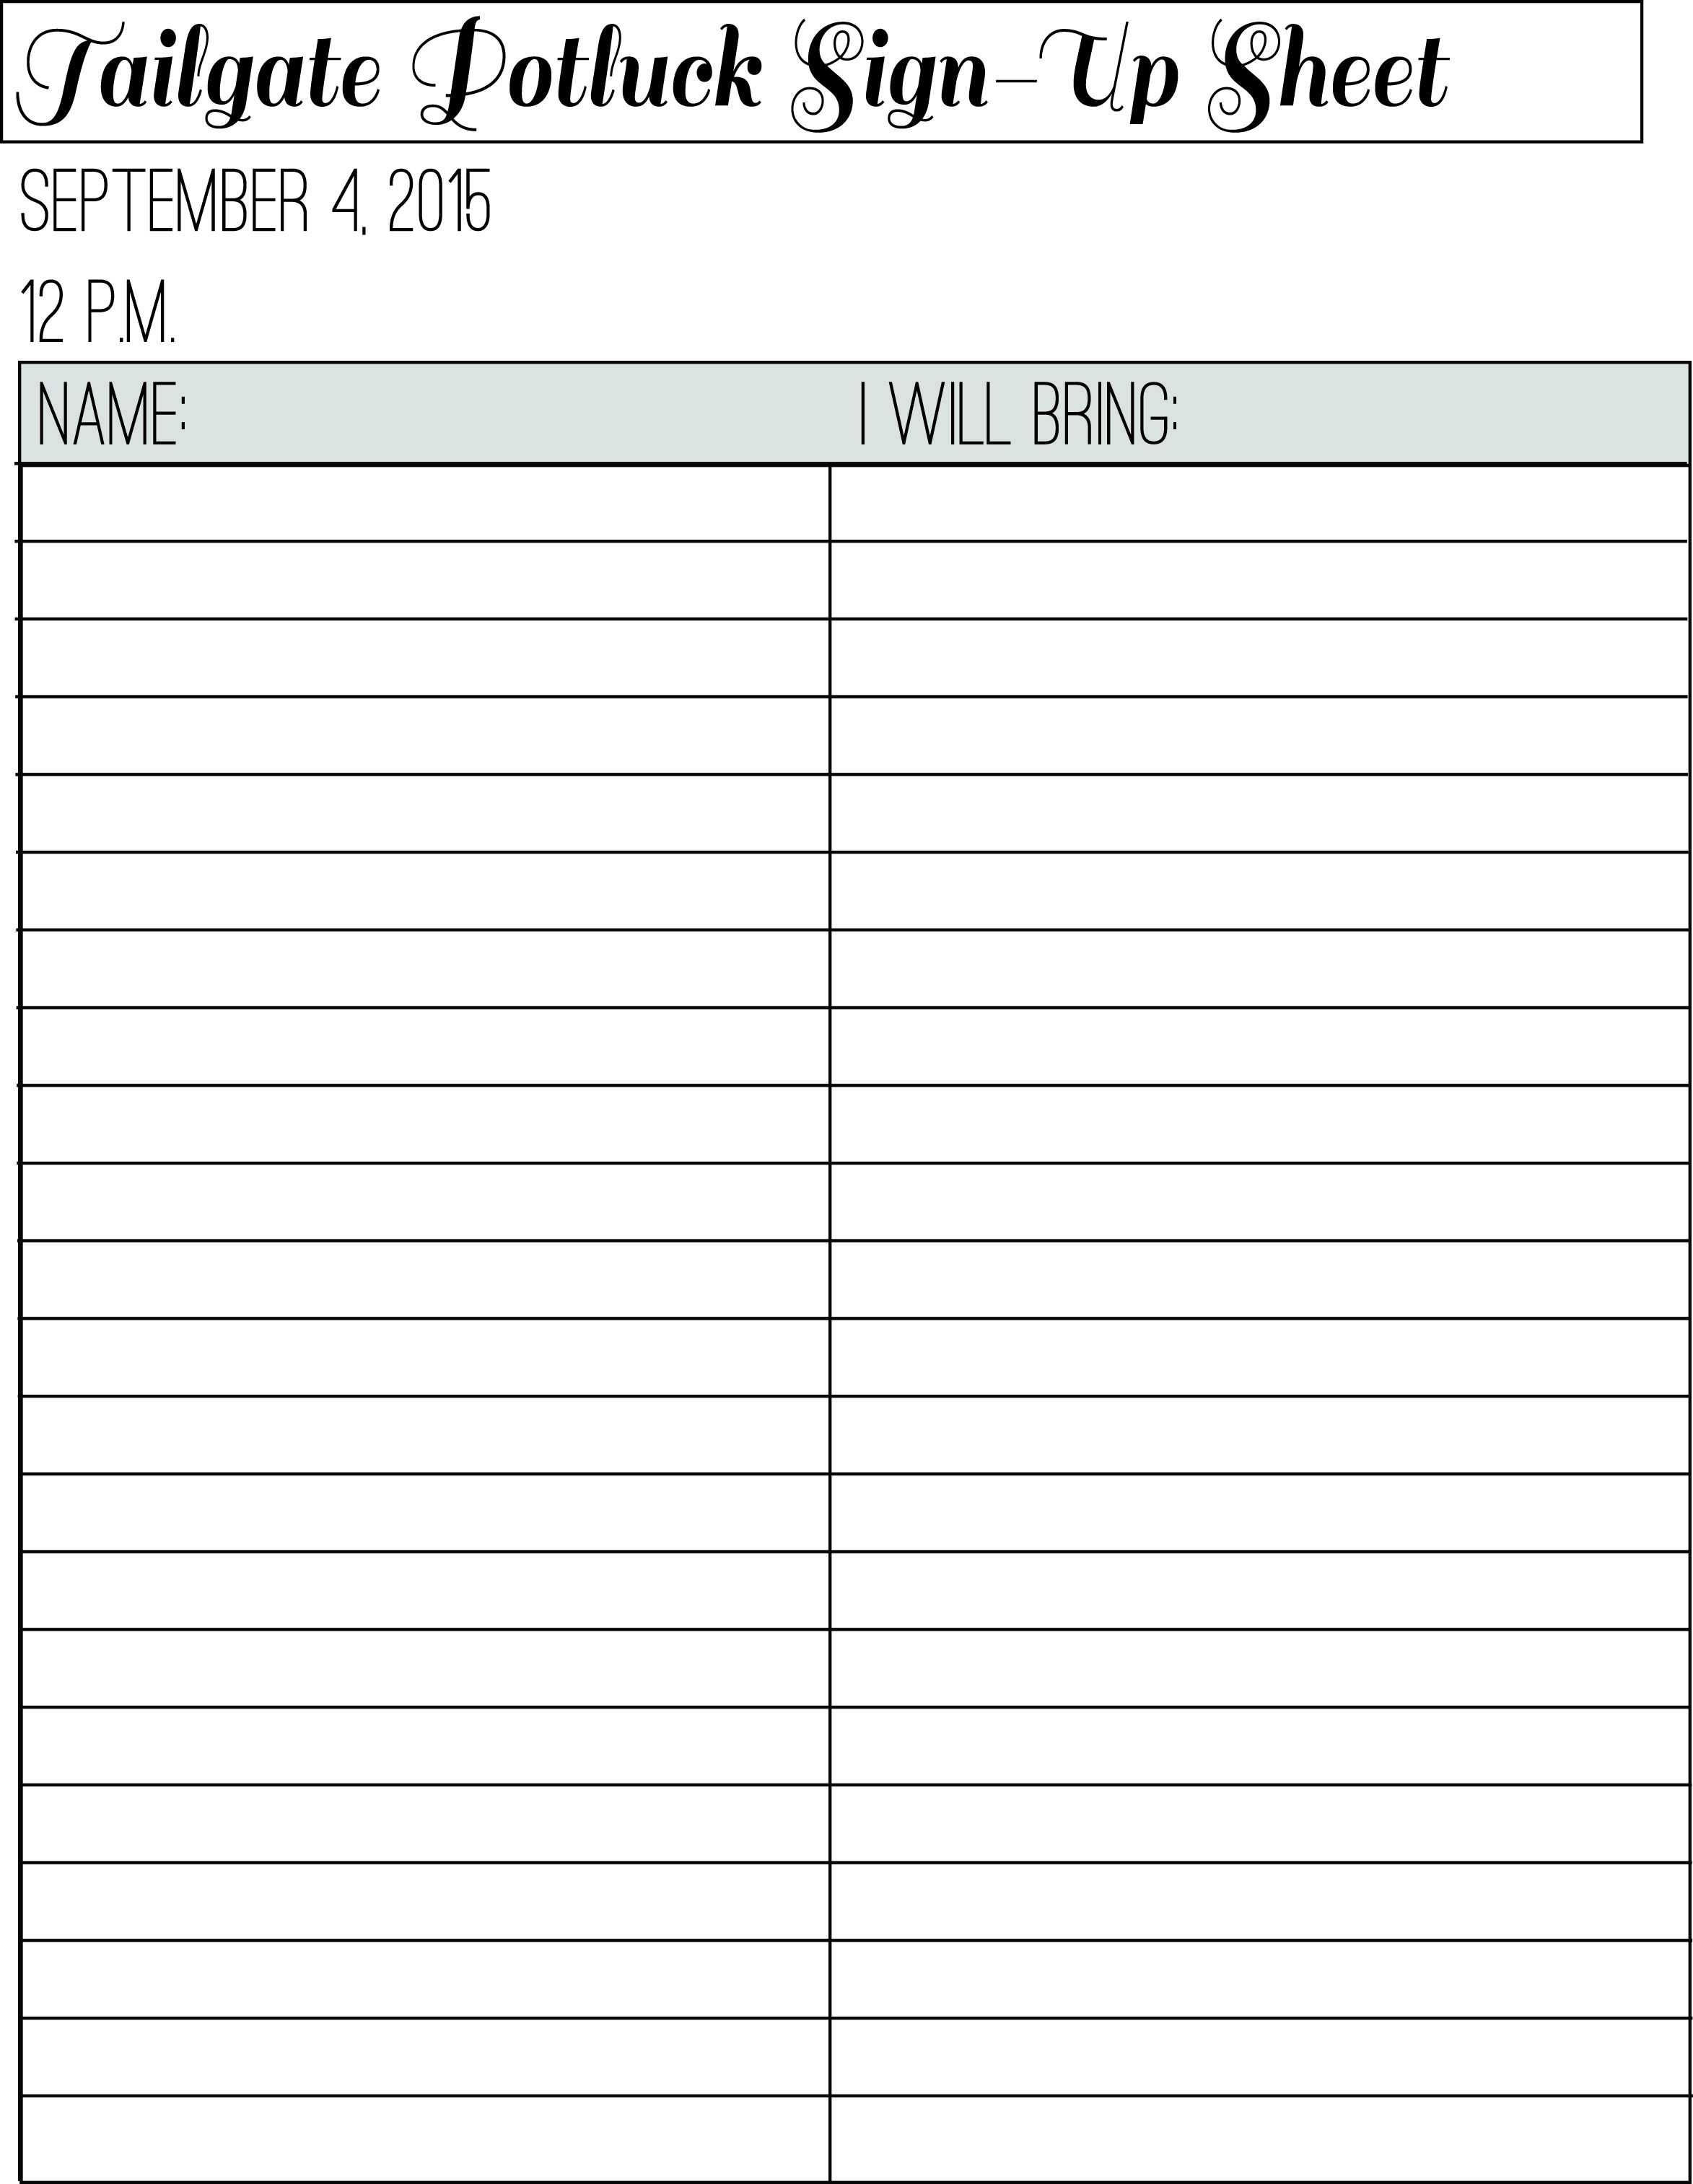 The Sign Up Sheet For Our Tailgate Potluck. | Valentine's Regarding Potluck Signup Sheet Template Word